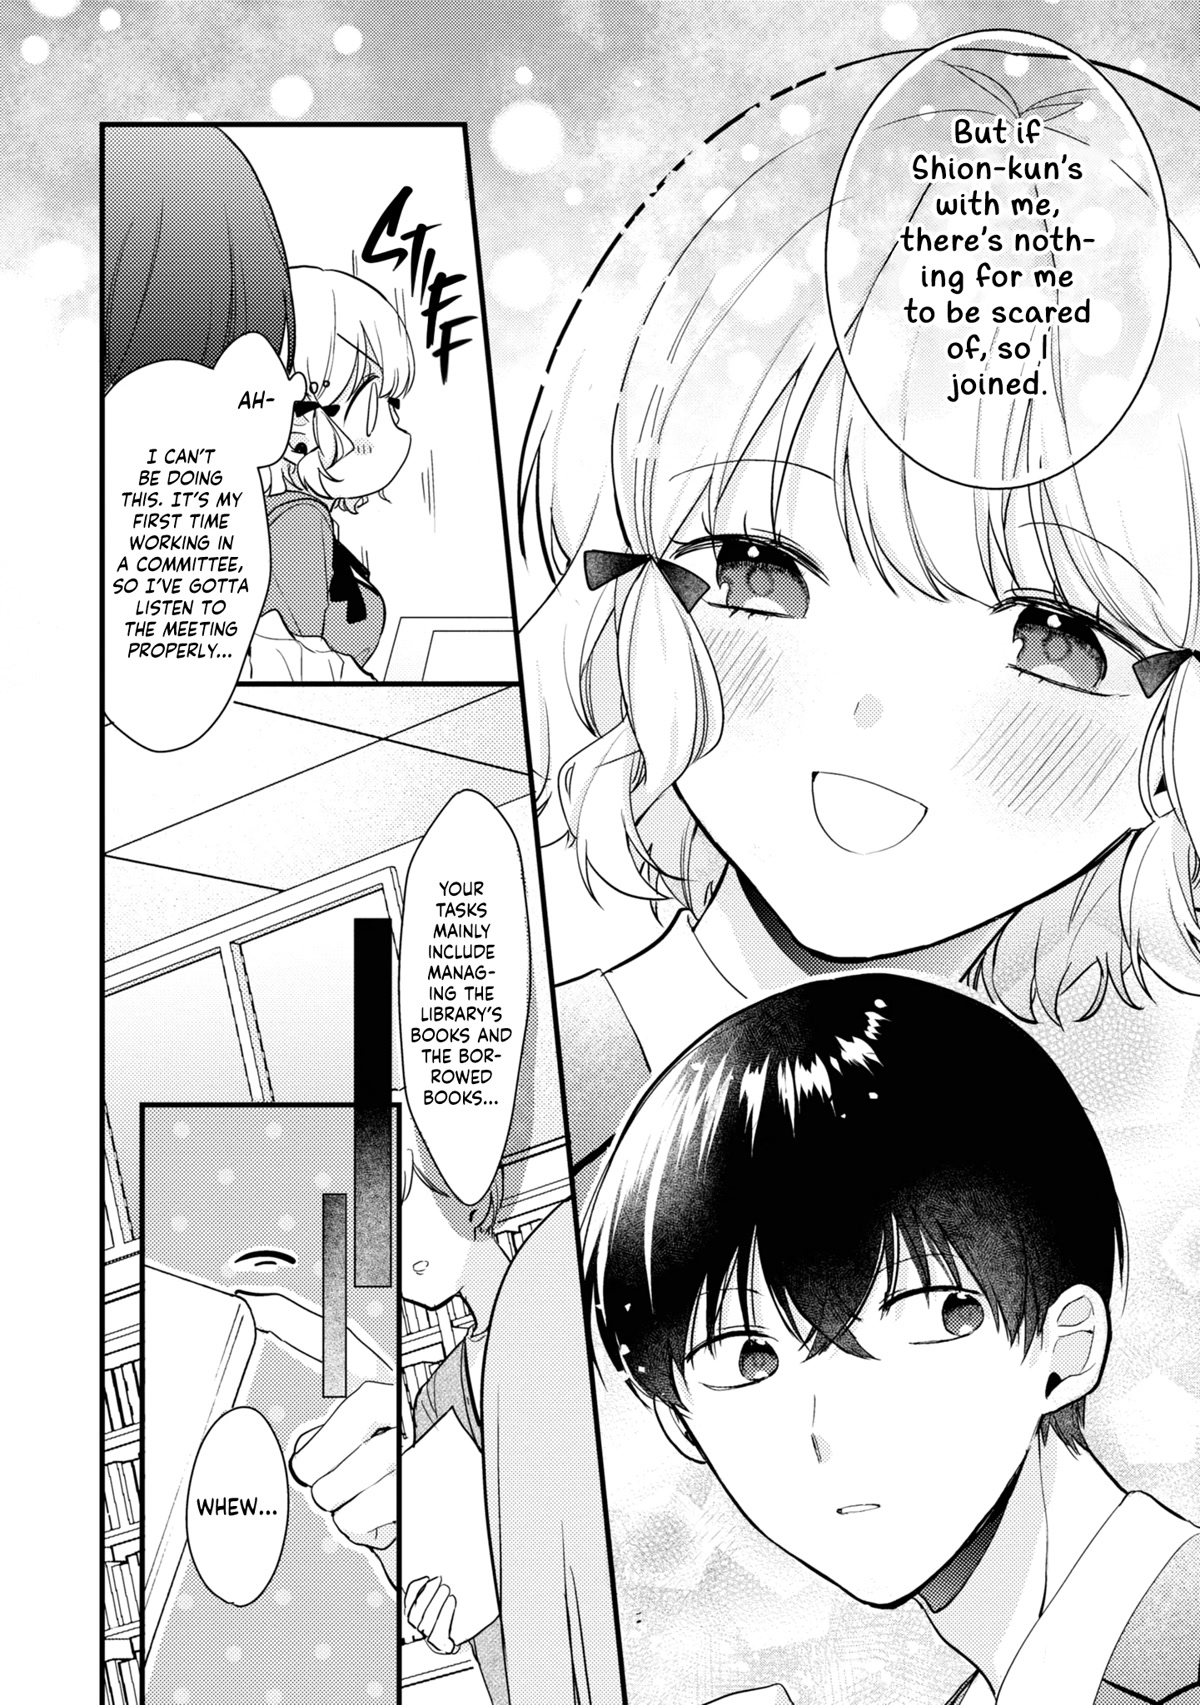 I Have A Second Chance At Life, So I’Ll Pamper My Yandere Boyfriend For A Happy Ending!! Chapter 3 #20